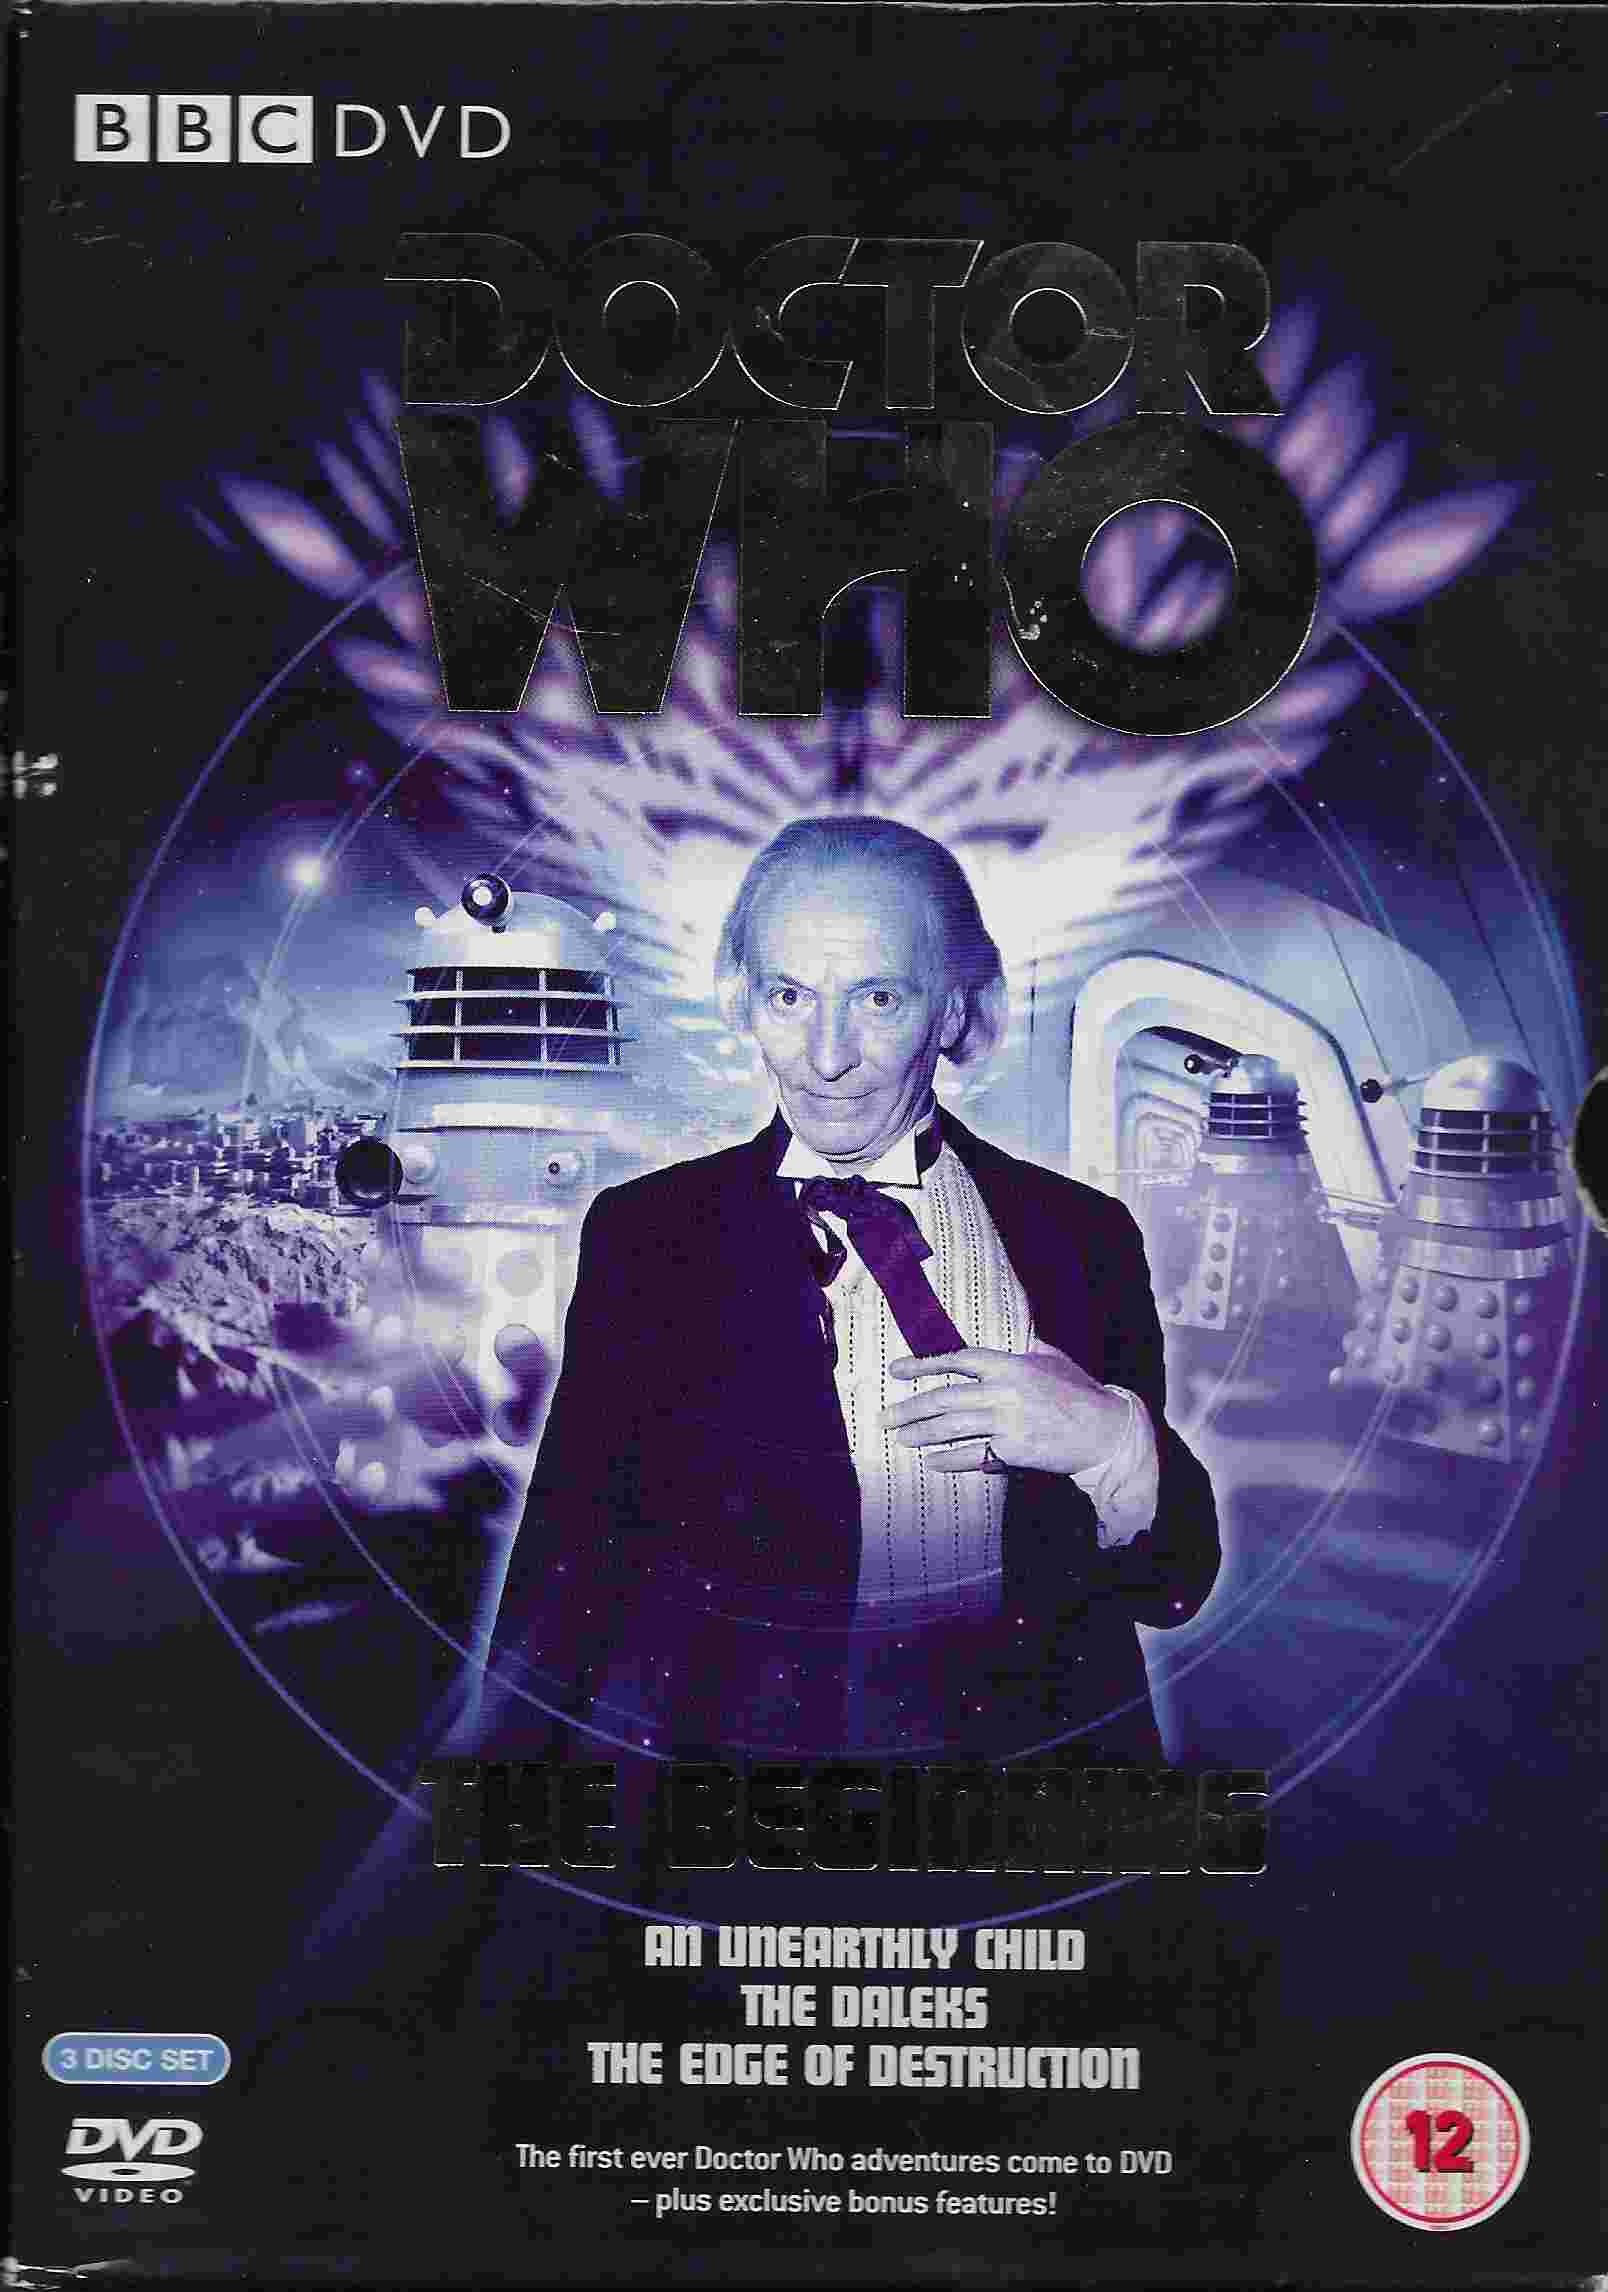 Picture of BBCDVD 1882 Doctor Who - The beginning by artist Anthony Coburn / Terry Nation / David Whitaker from the BBC dvds - Records and Tapes library